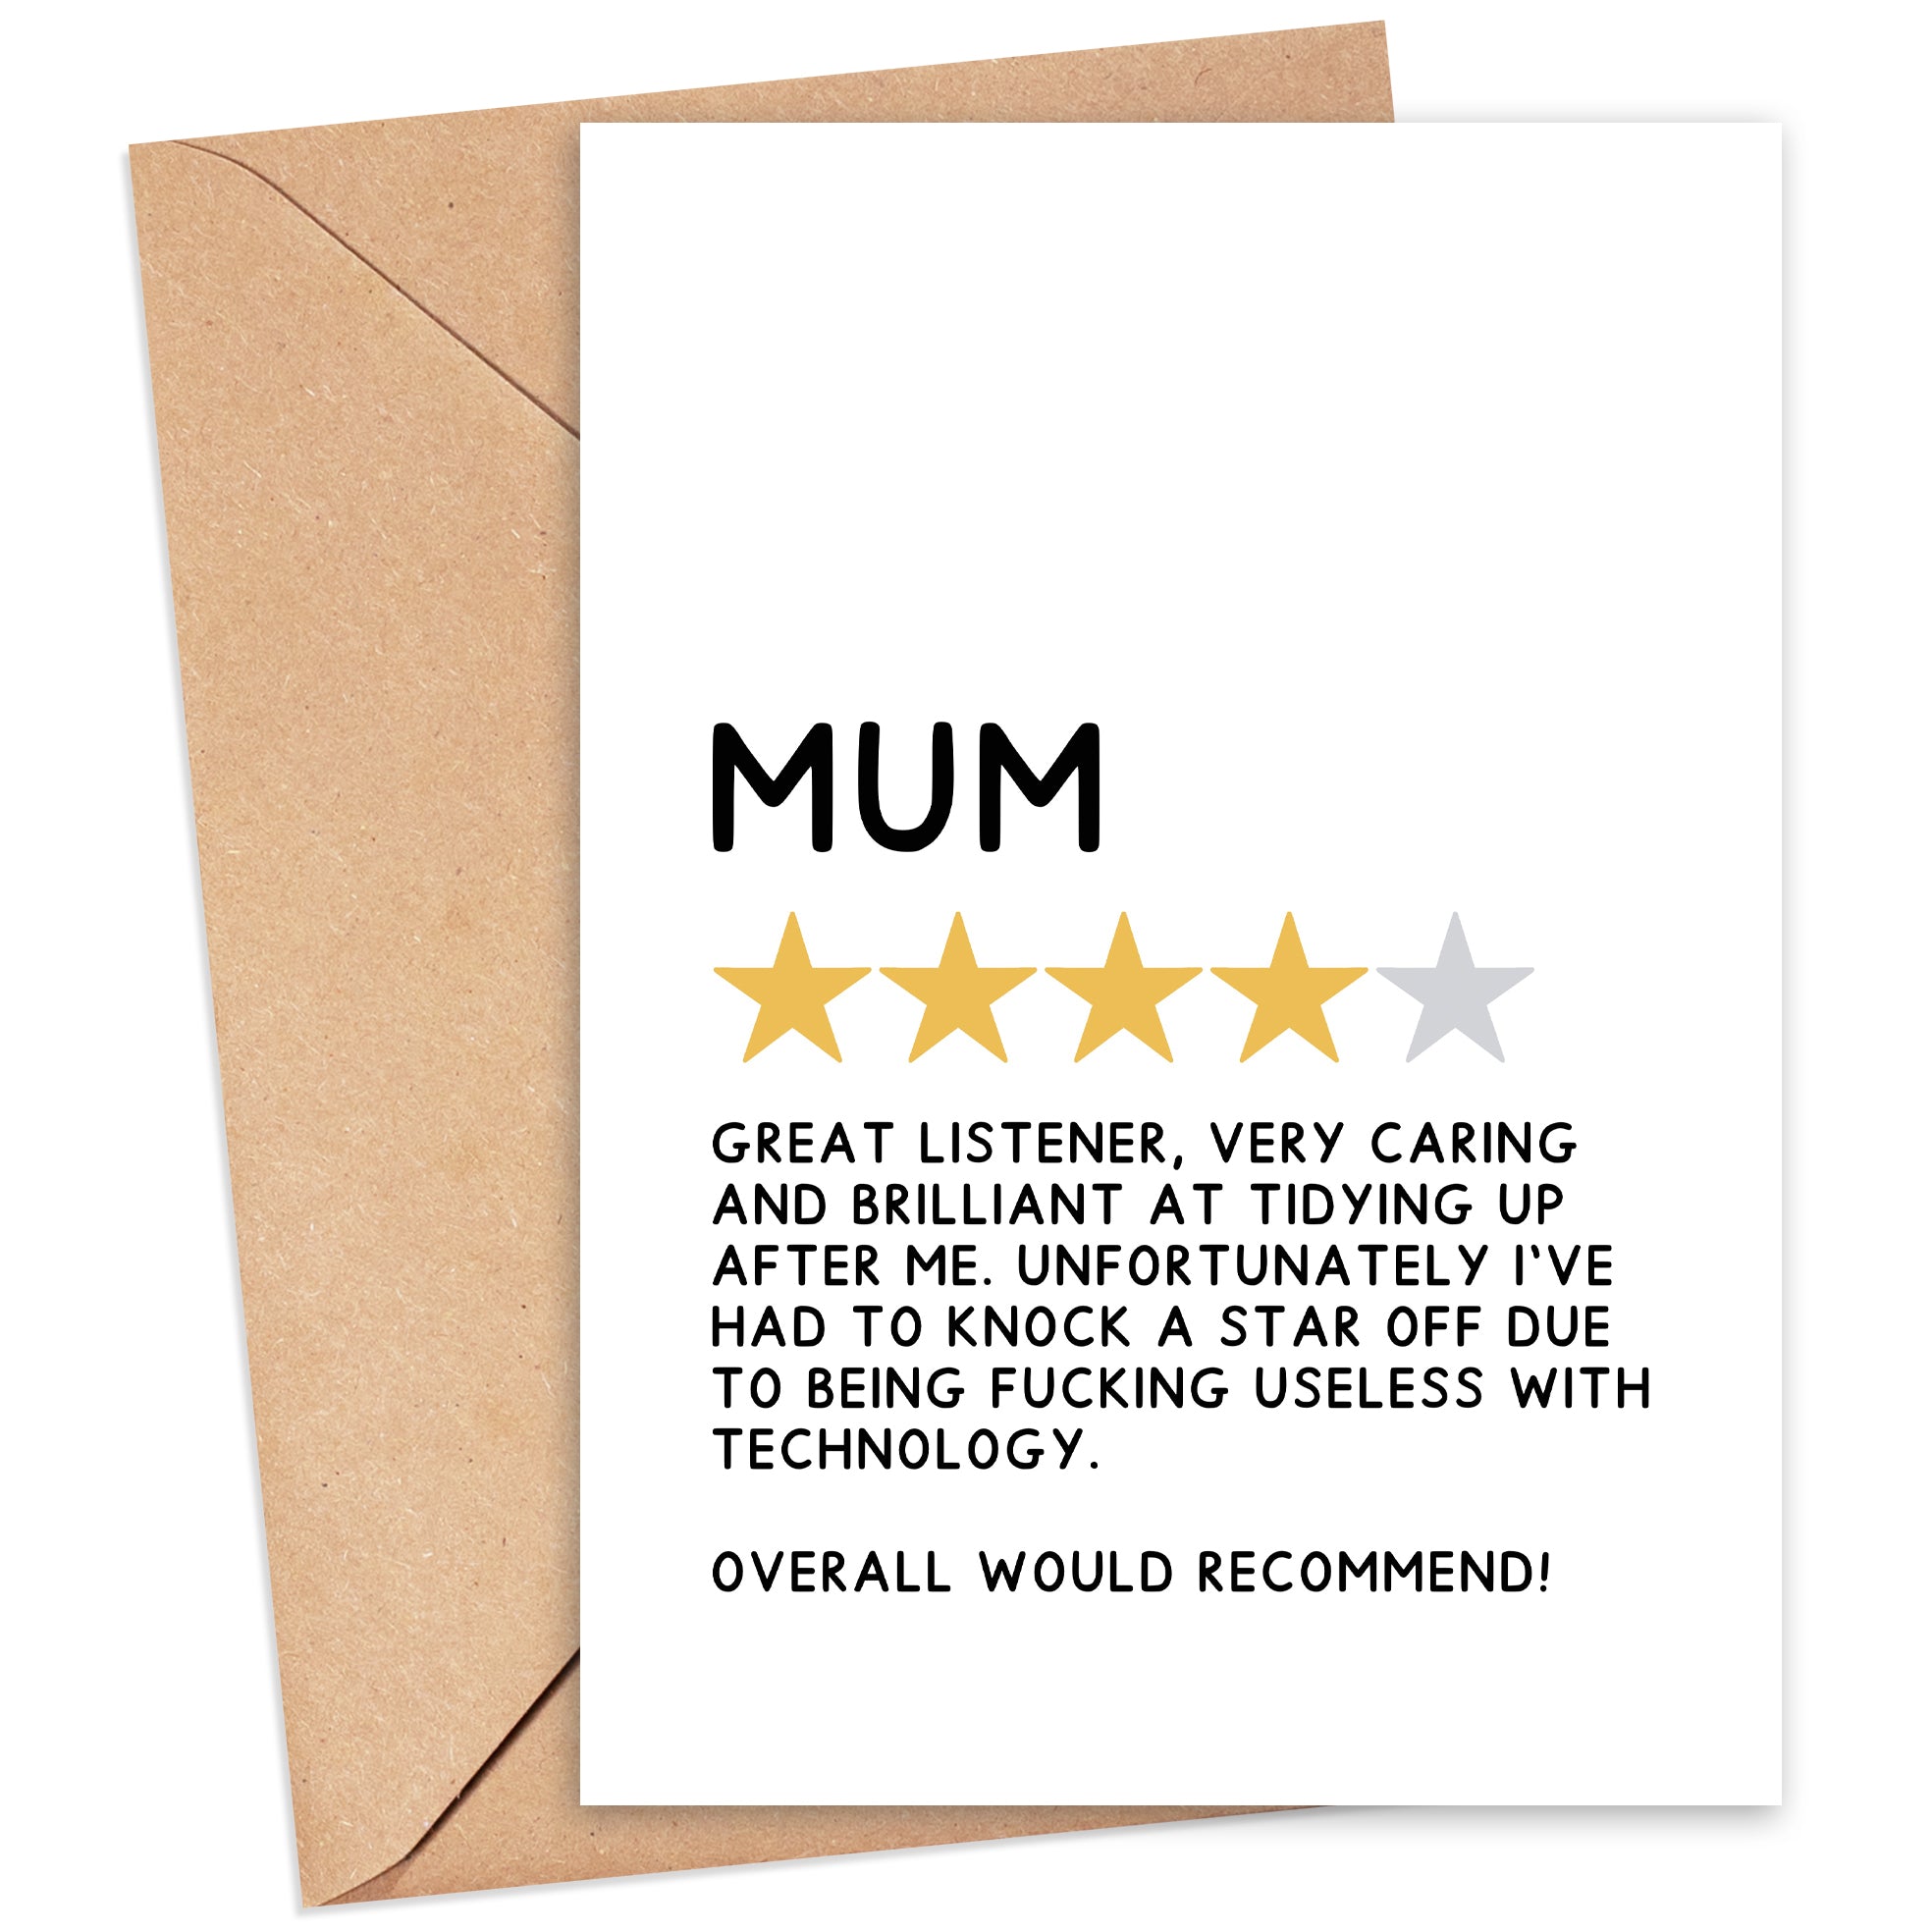 Mum 4 Star Review Card